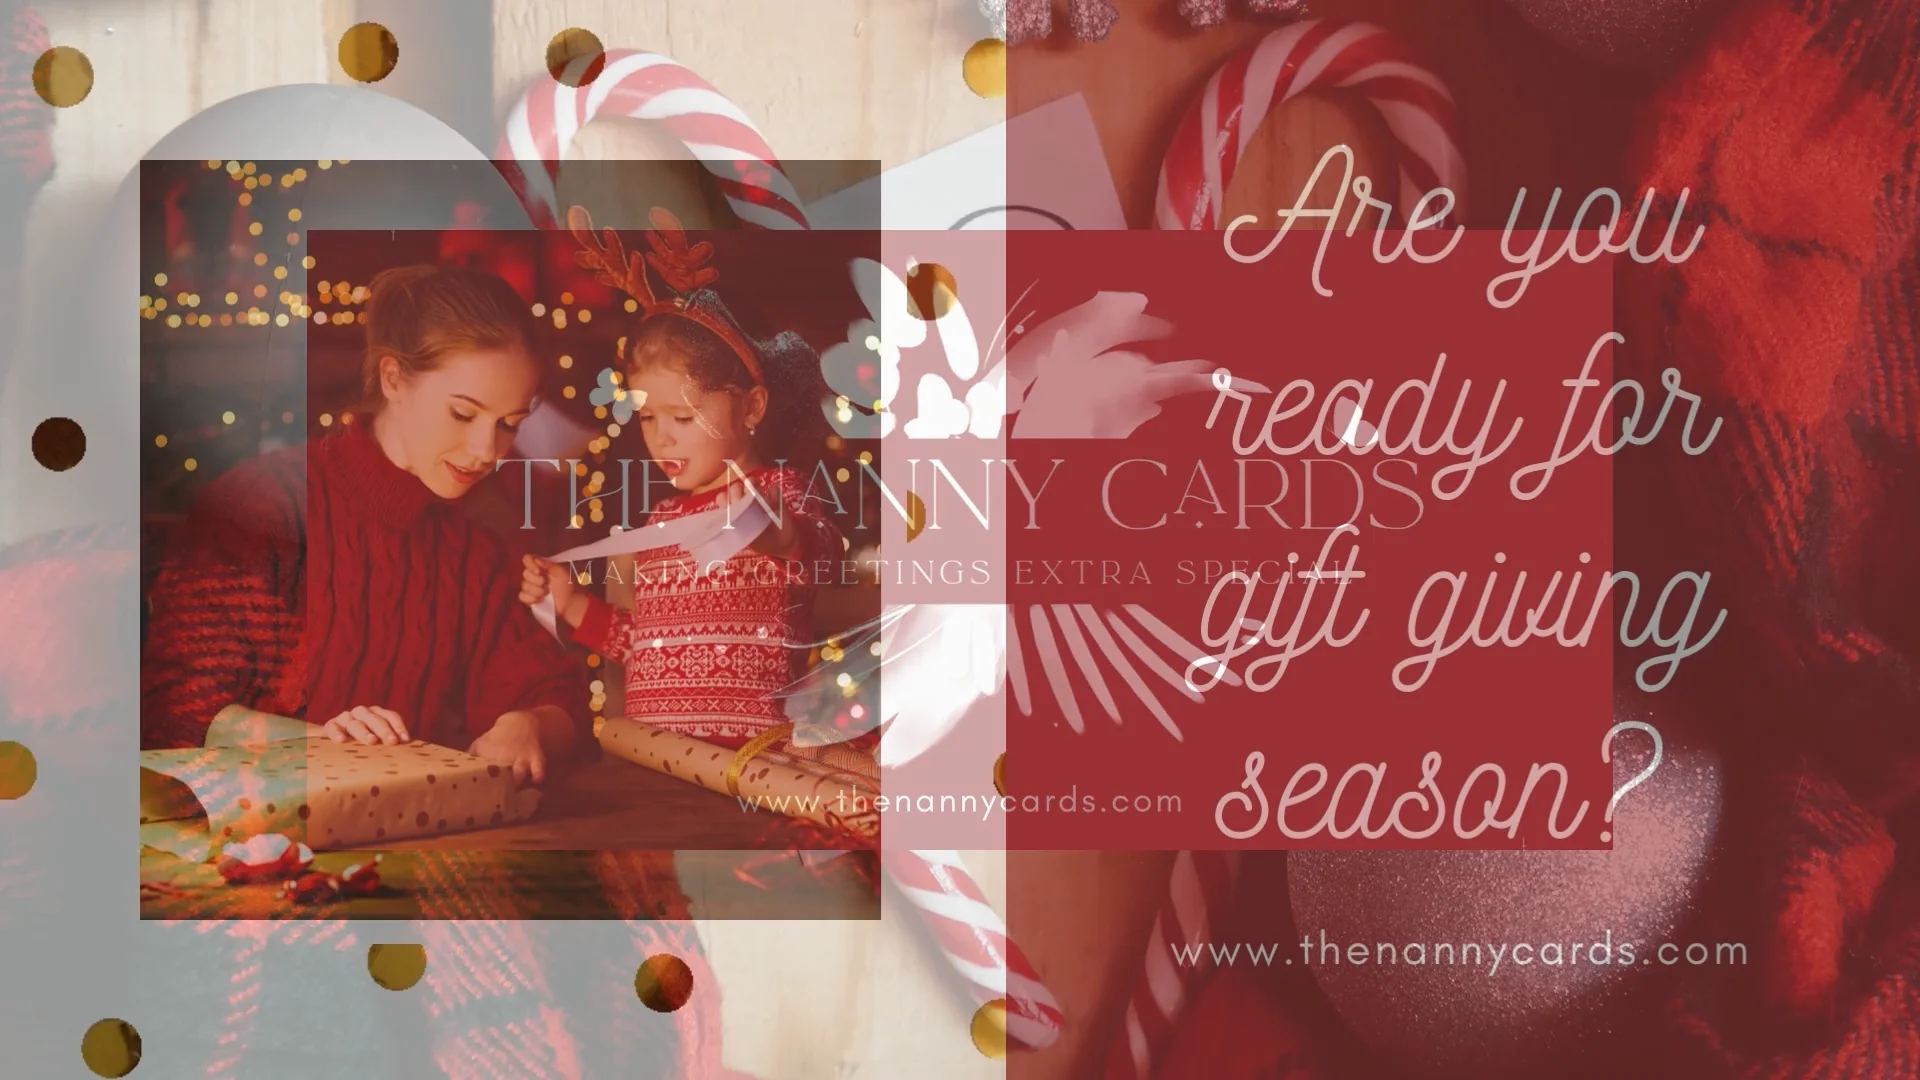 CLN - 'Tis the season of gift-giving! ❤ Shop for you and